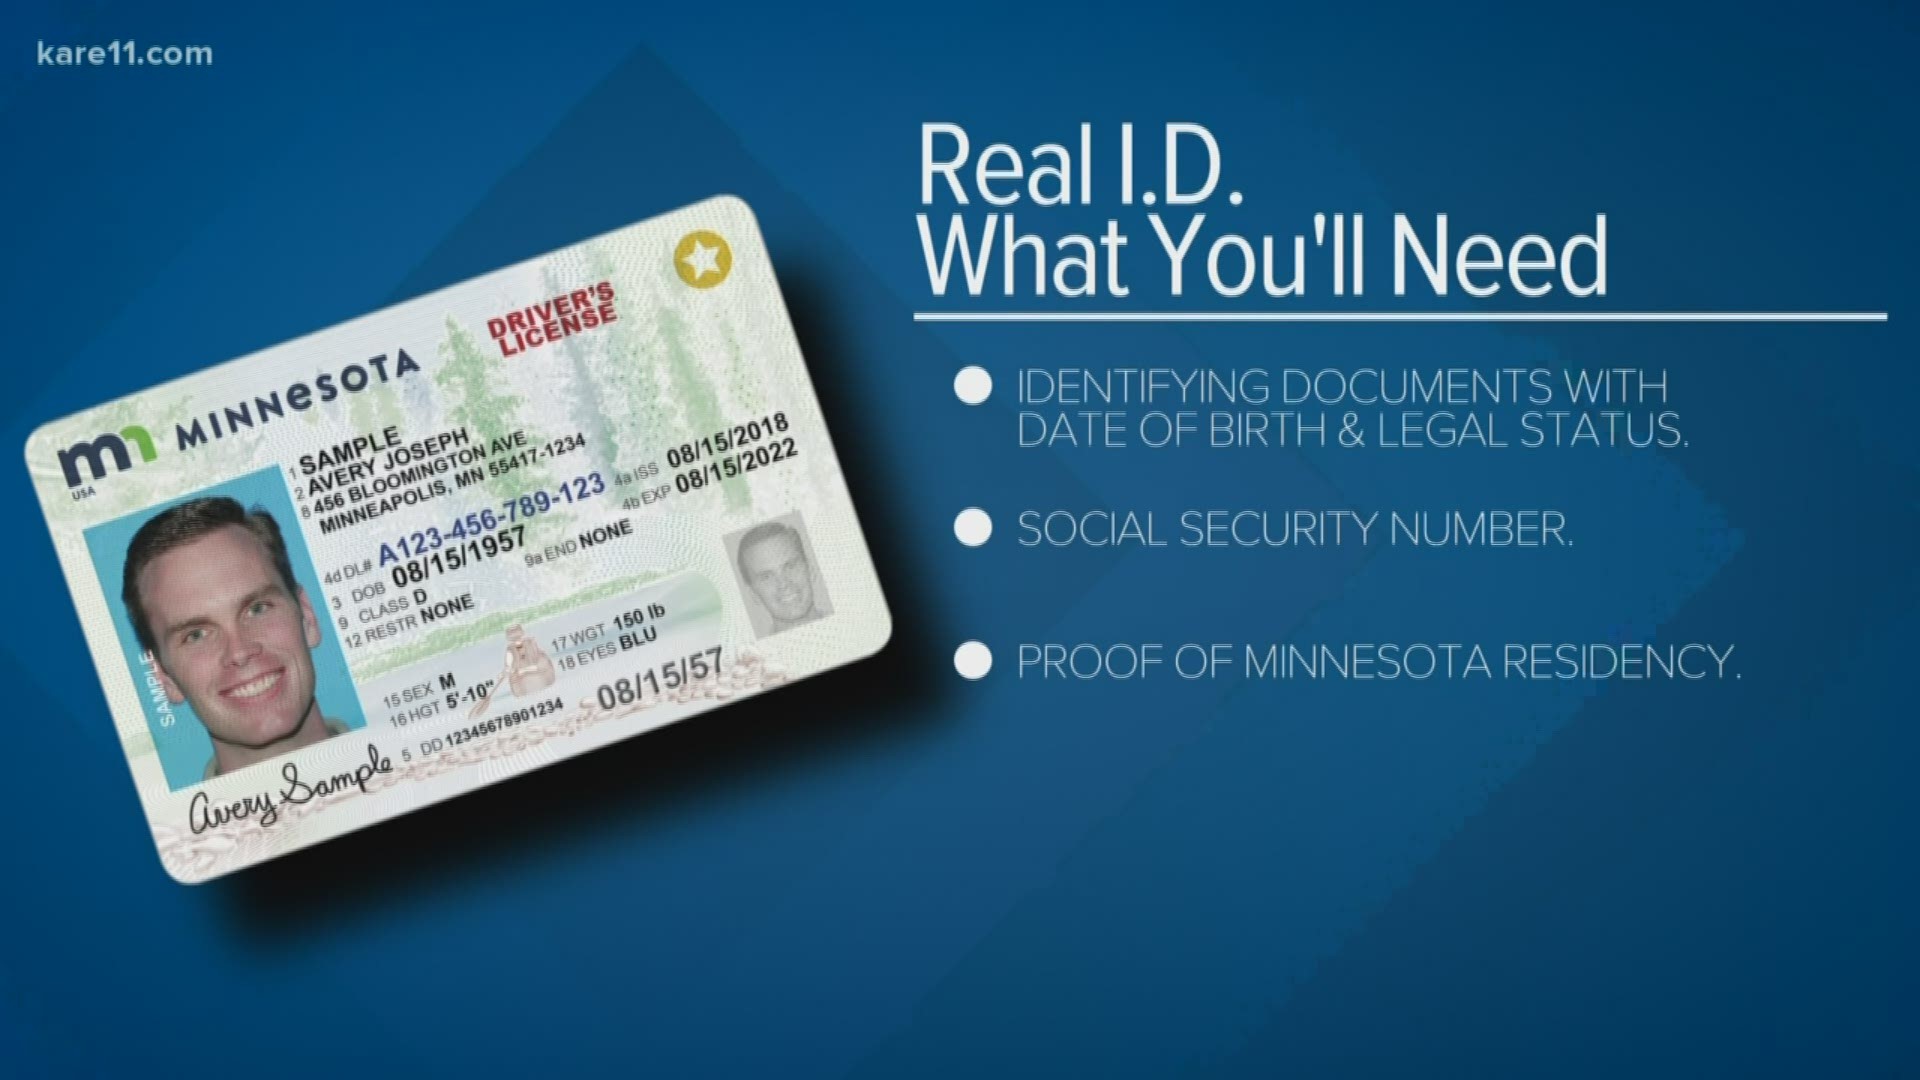 It's 2020, so it means you may want to think about getting a "Real ID."